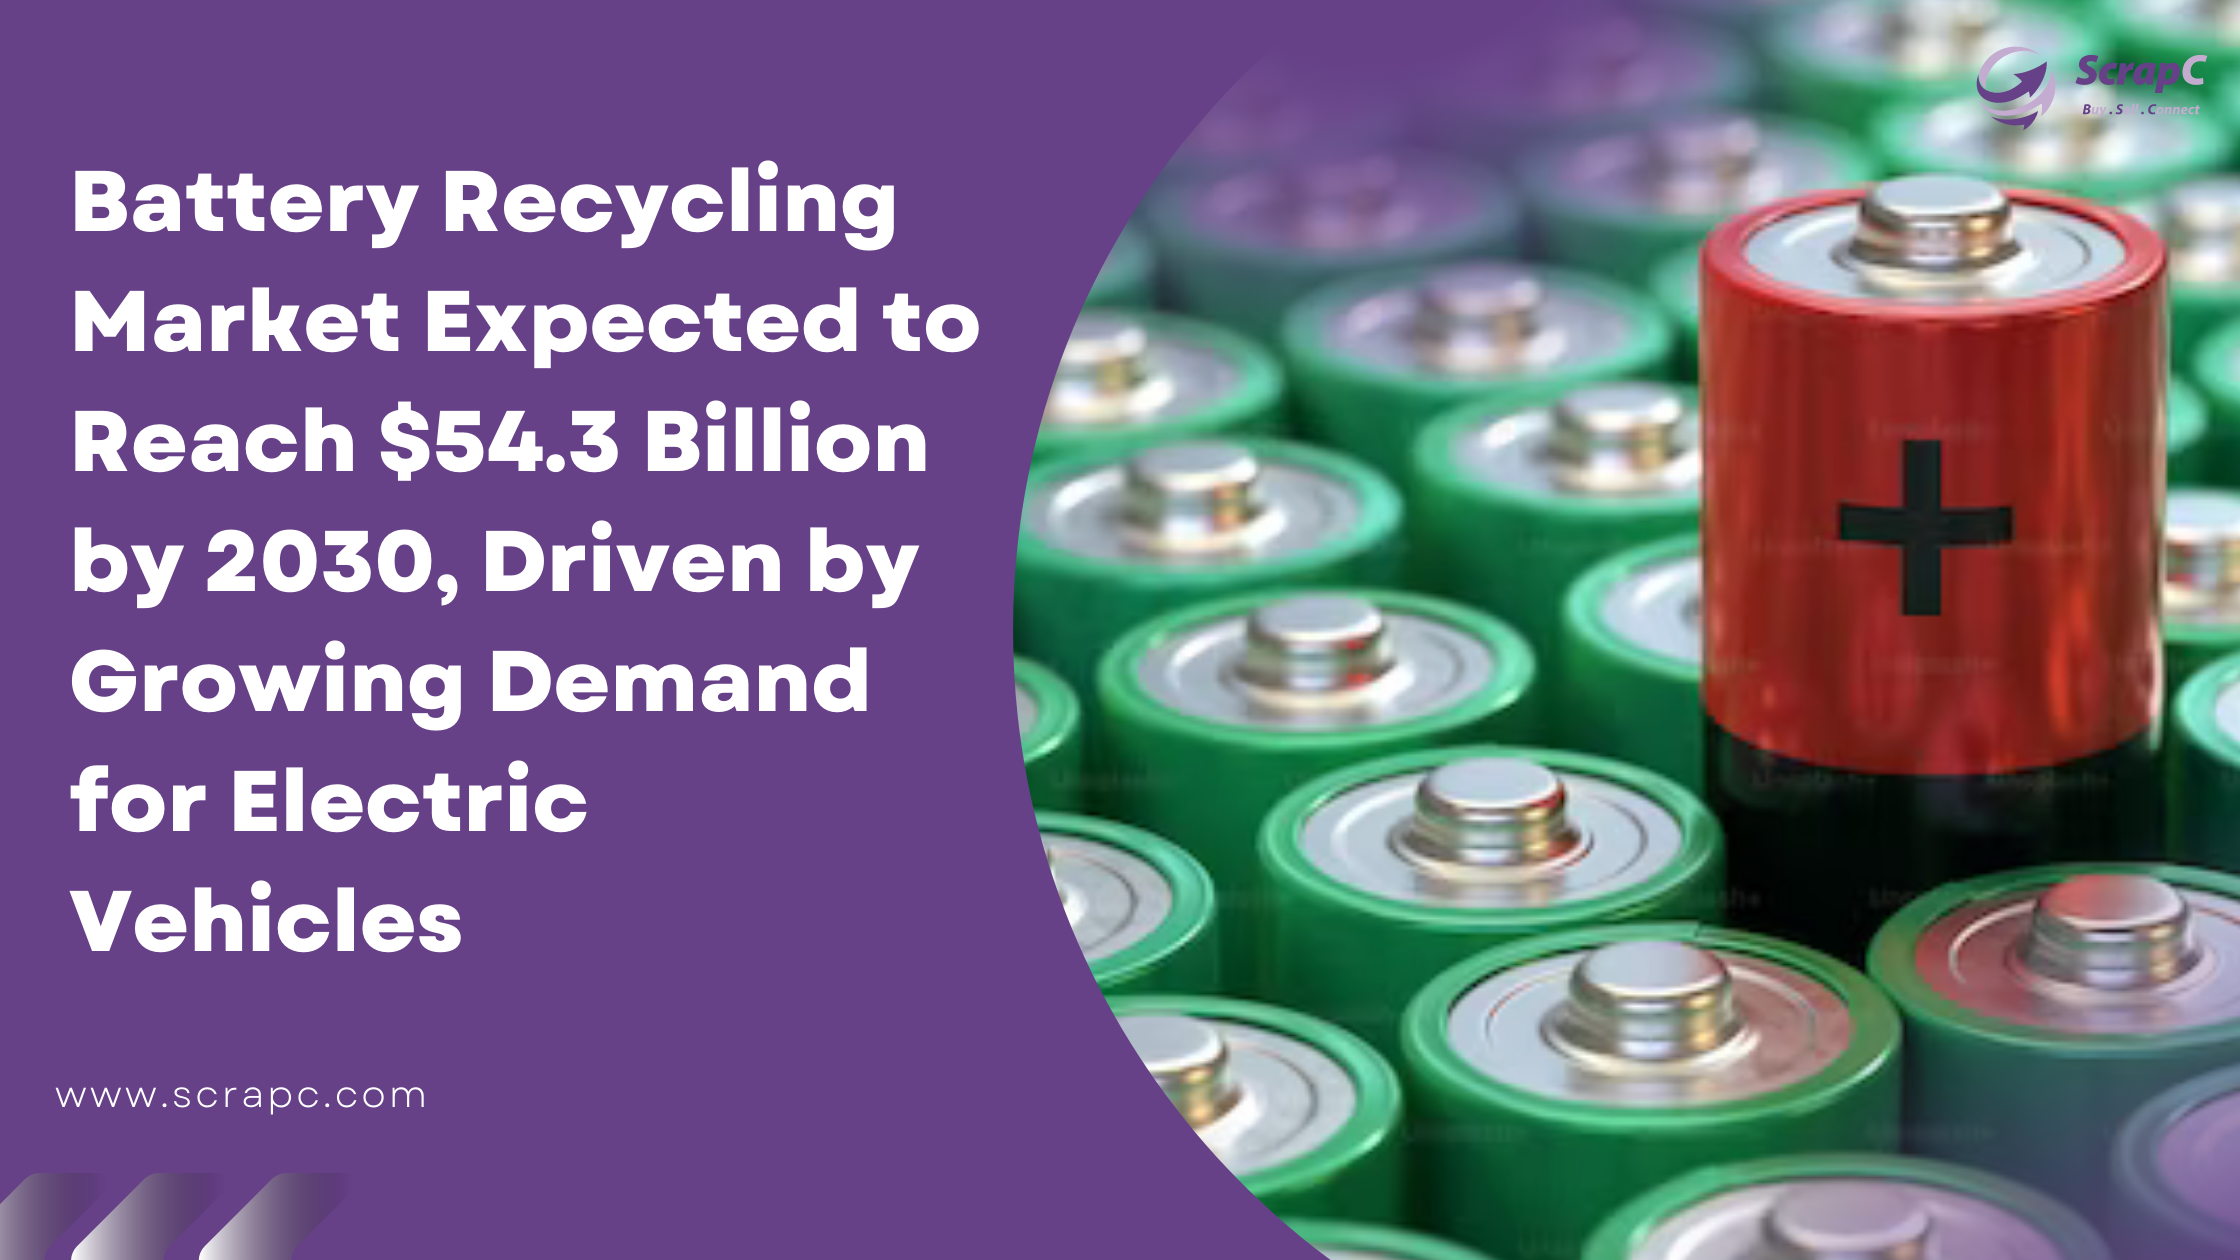 Battery Recycling Market Growth Chart, Expected to Reach $54.3 Billion by 2030.